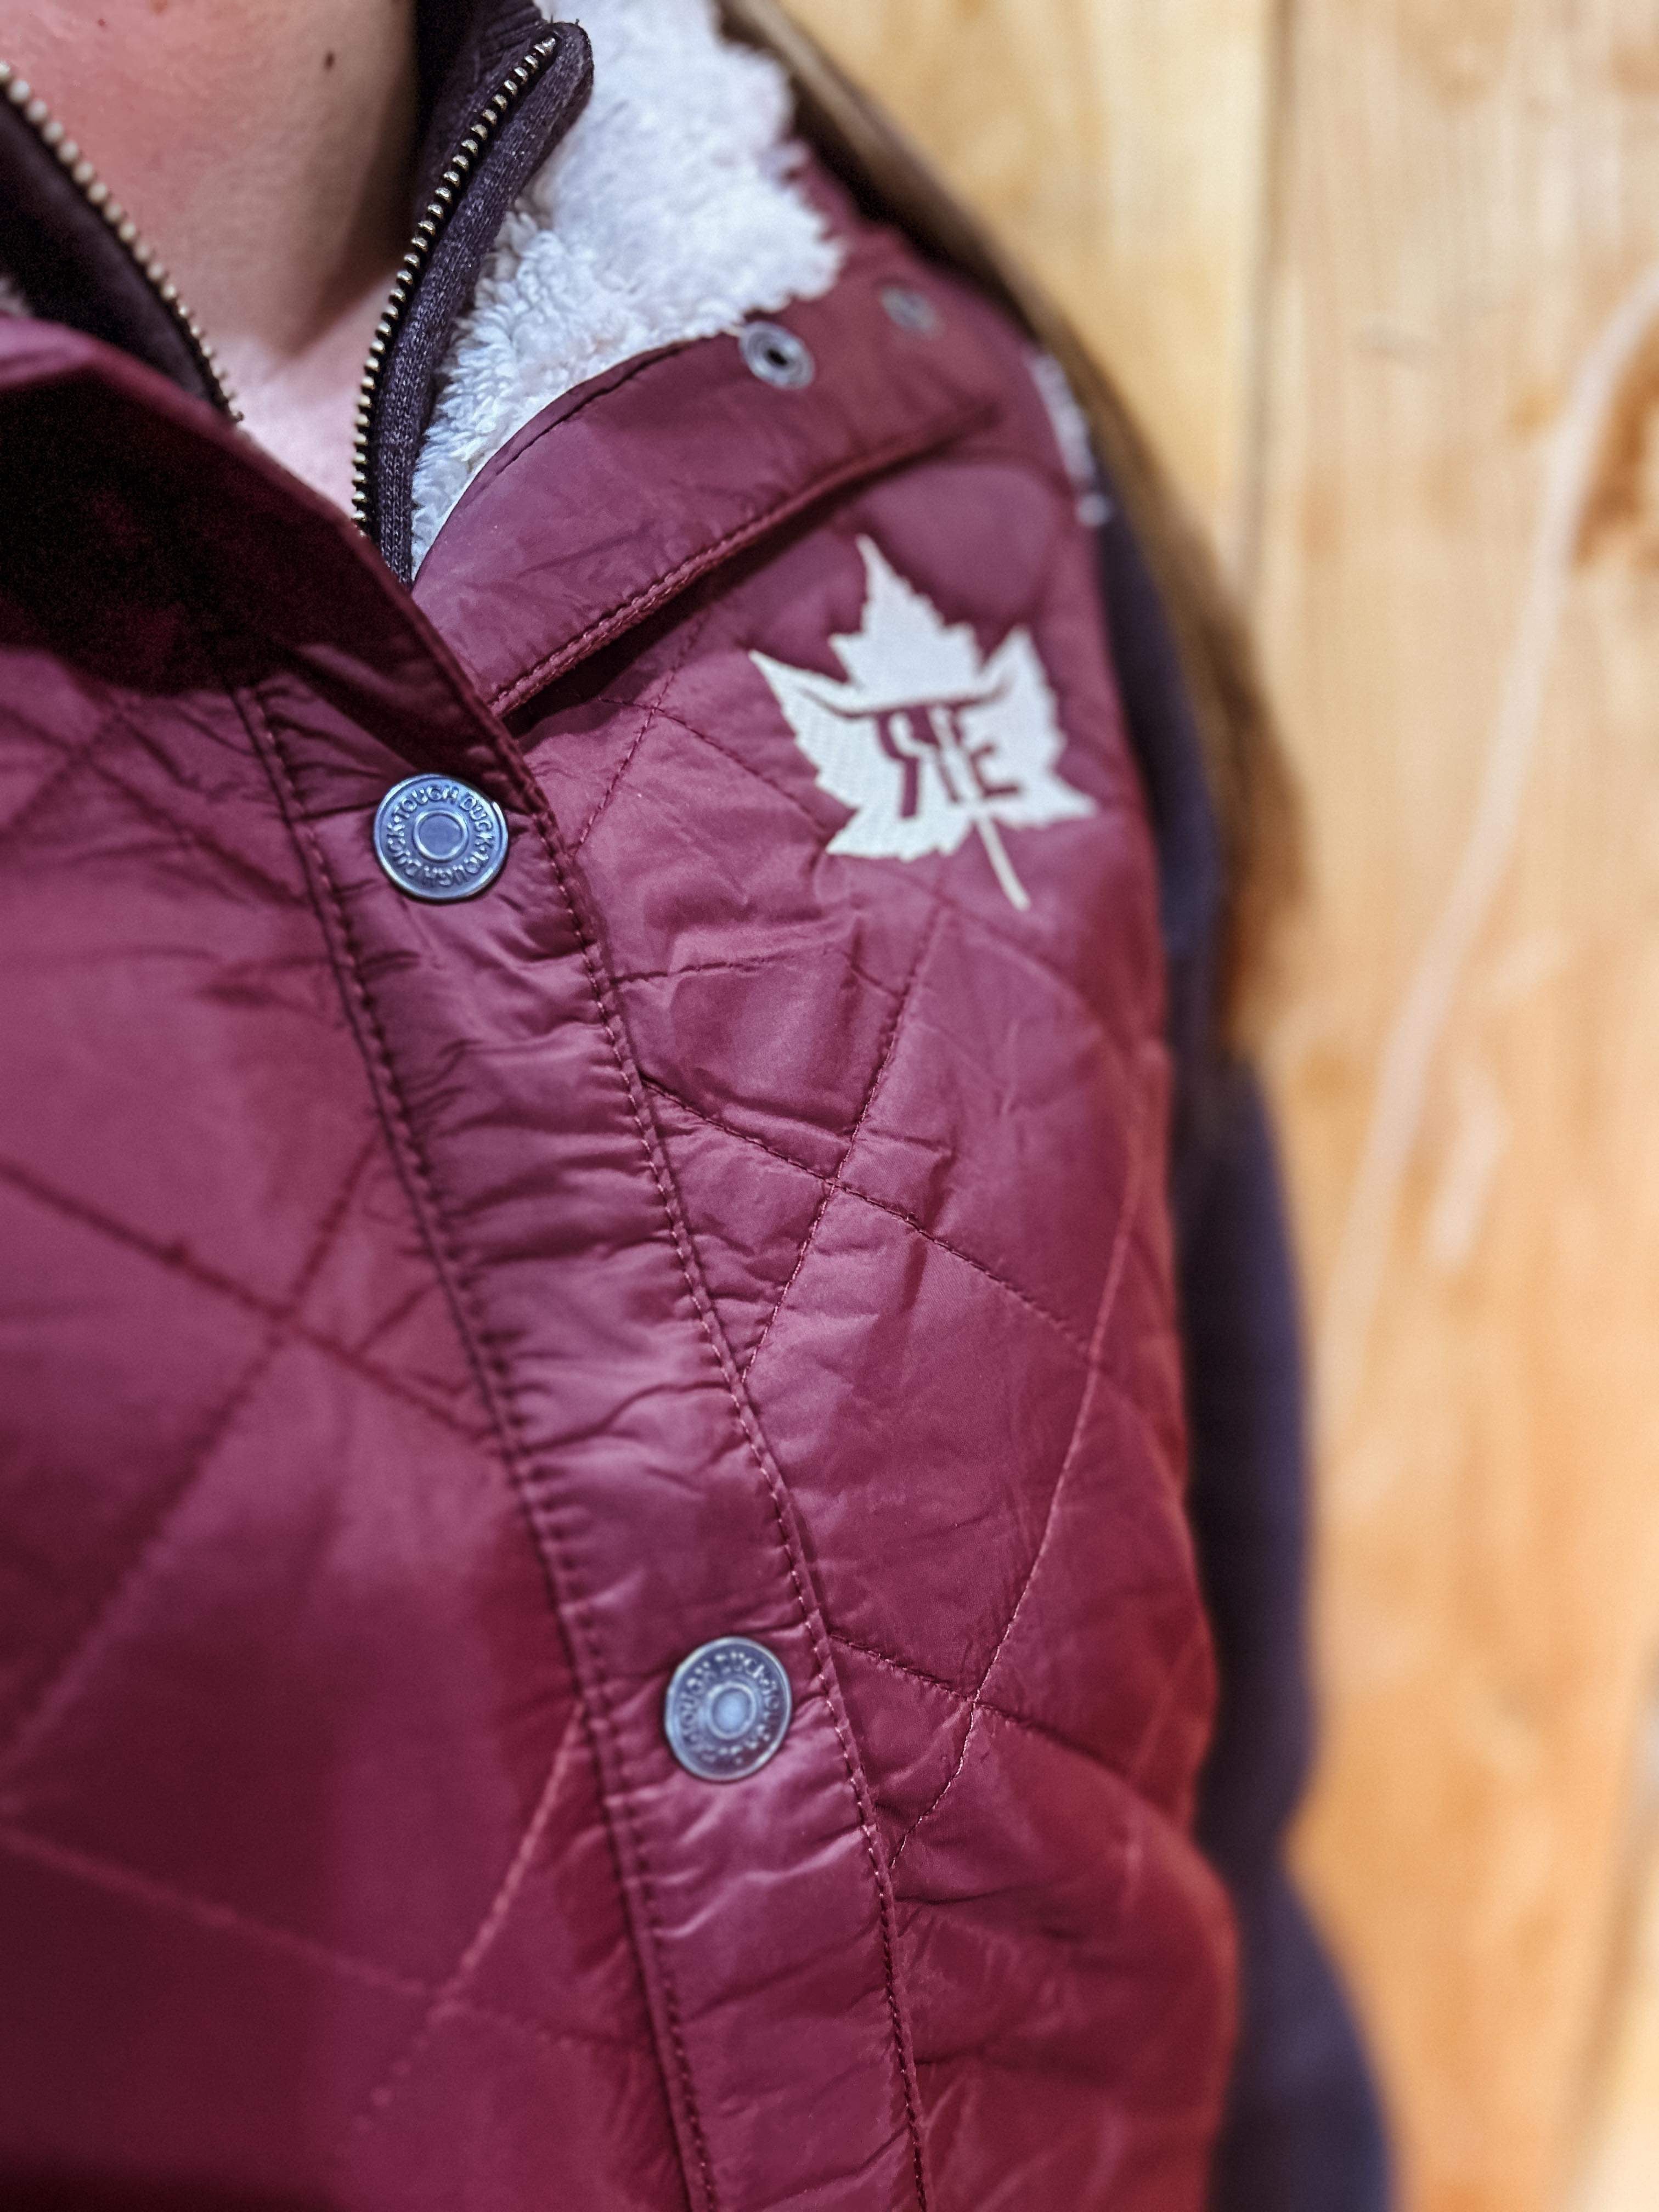 True North and Free Sherpa Ranchy Vest